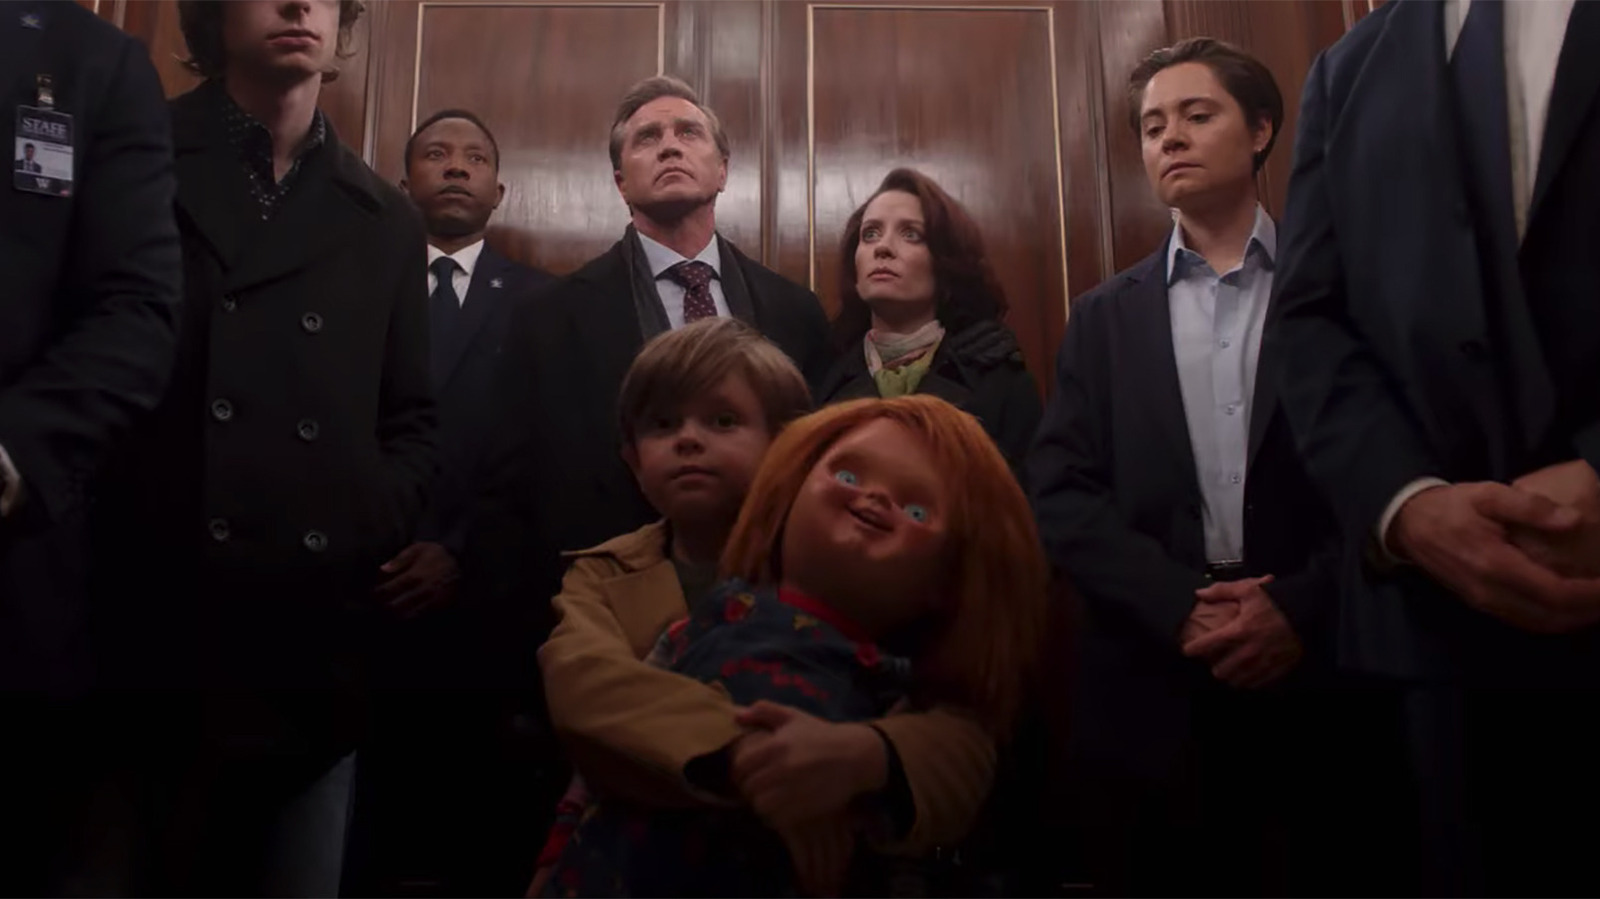 The Chucky Season 3 Trailer Puts A 'Good Guy' In The Oval Office